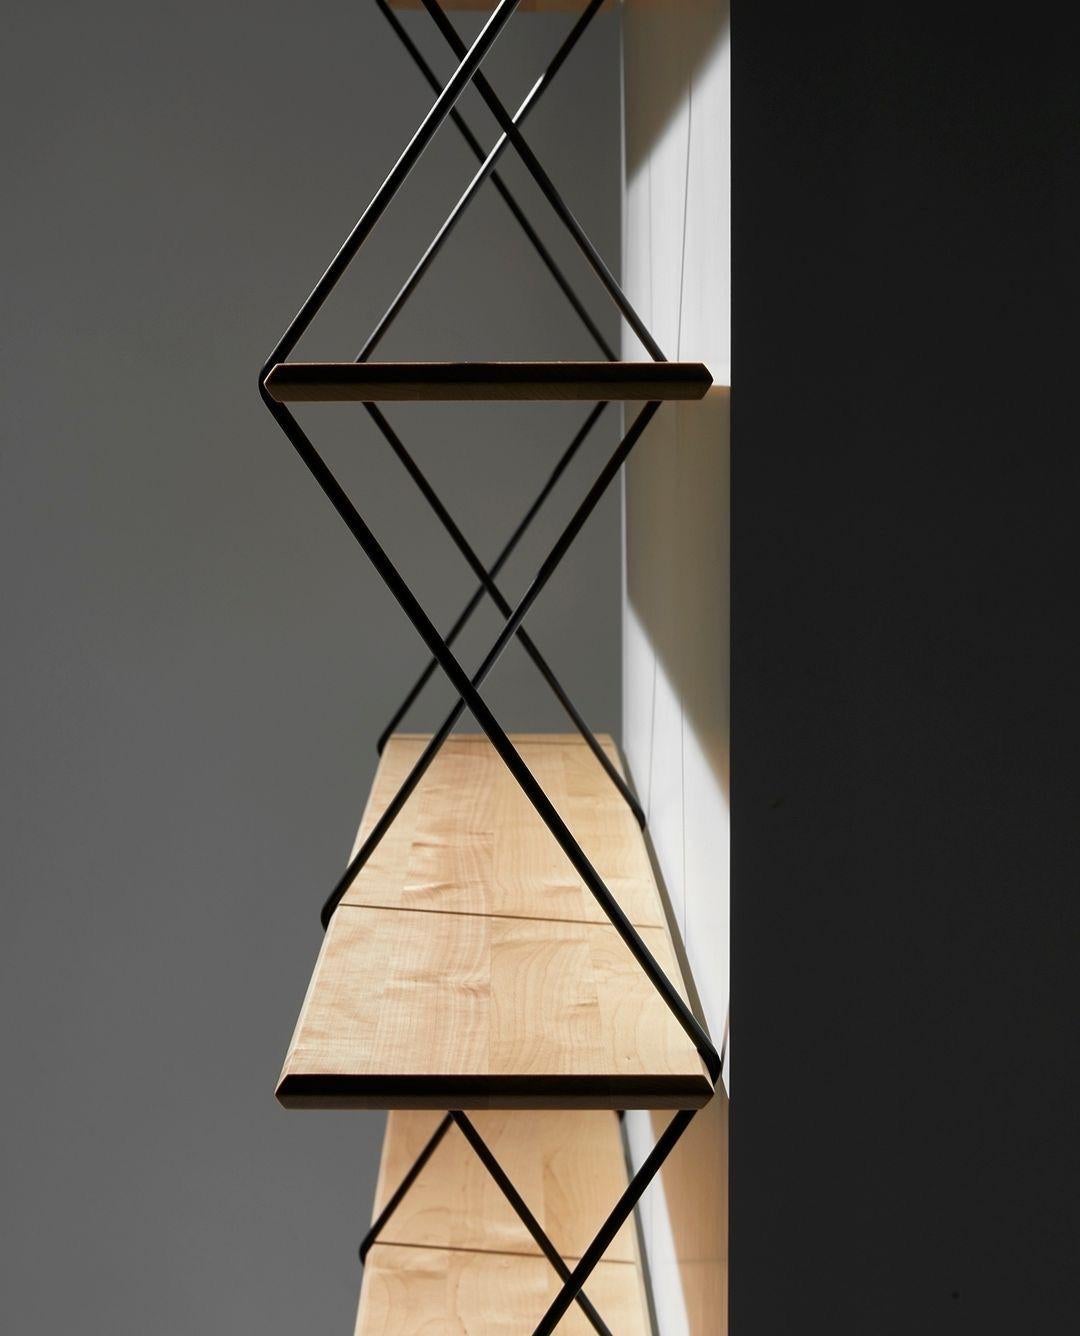 Climb is an ingenious shelving system made of beveled wooden boards supported by metal wires.

The design plays with the sensation of tension of the wires that grasps the wooden shelves and becomes a rigid structure as the product is assembled.